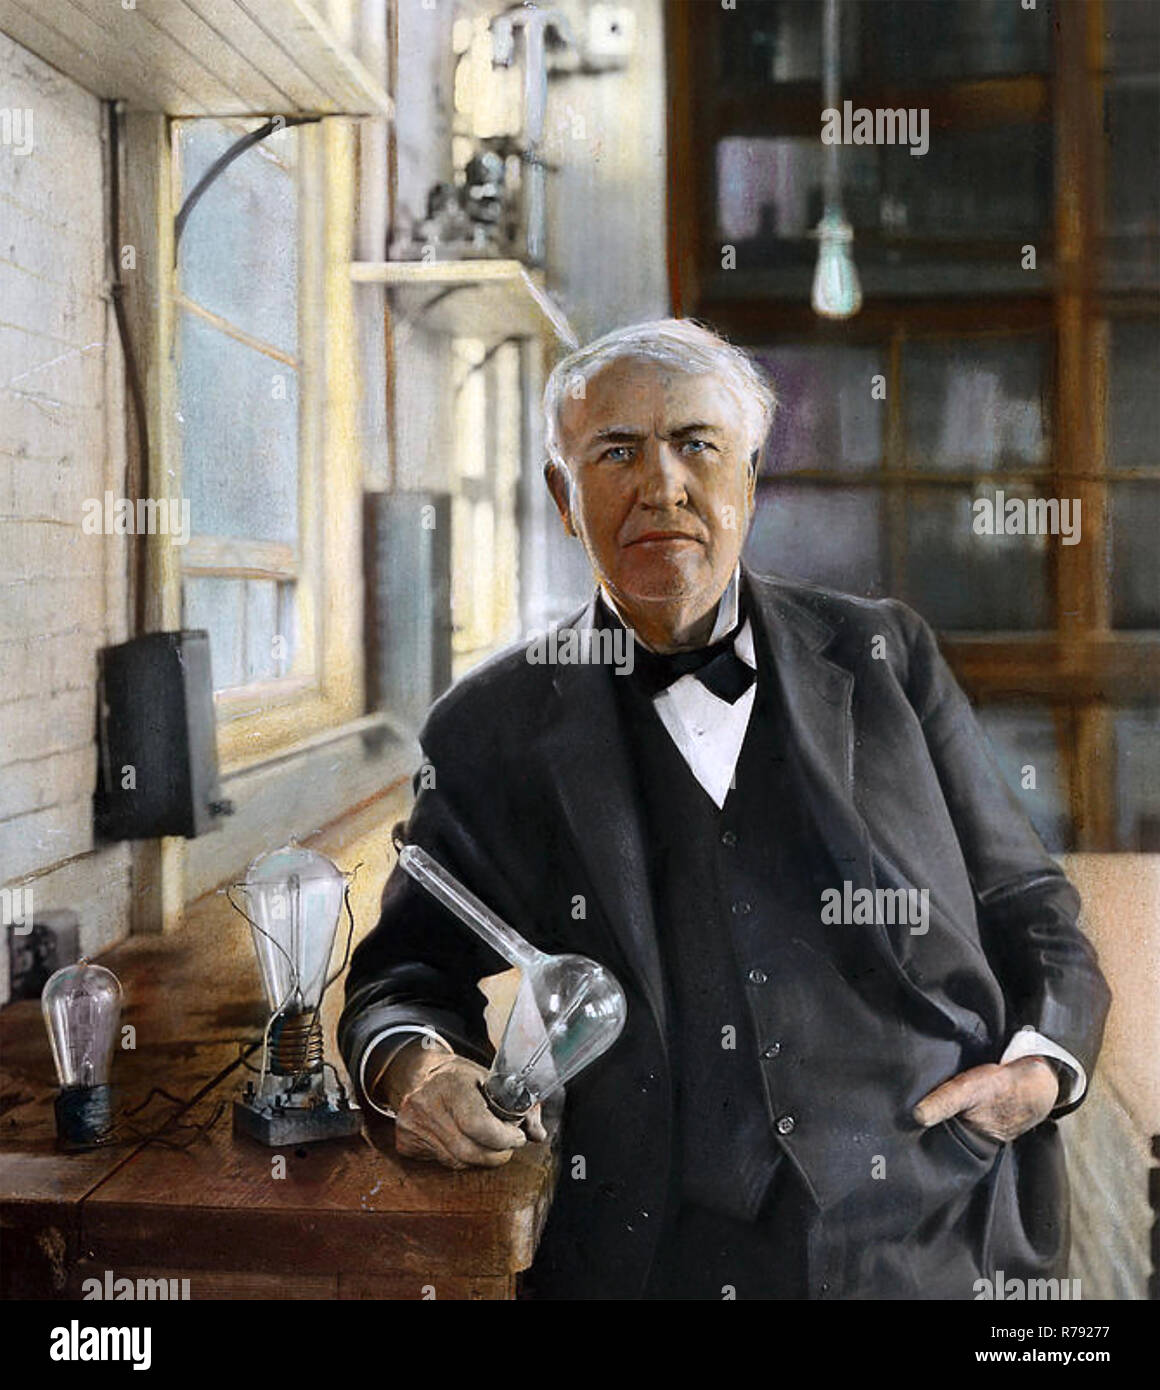 THOMAS EDISON (1847-1931) American inventor and businessman seen with some of his light bulb designs about 1923 in a hand tinted photograph Stock Photo